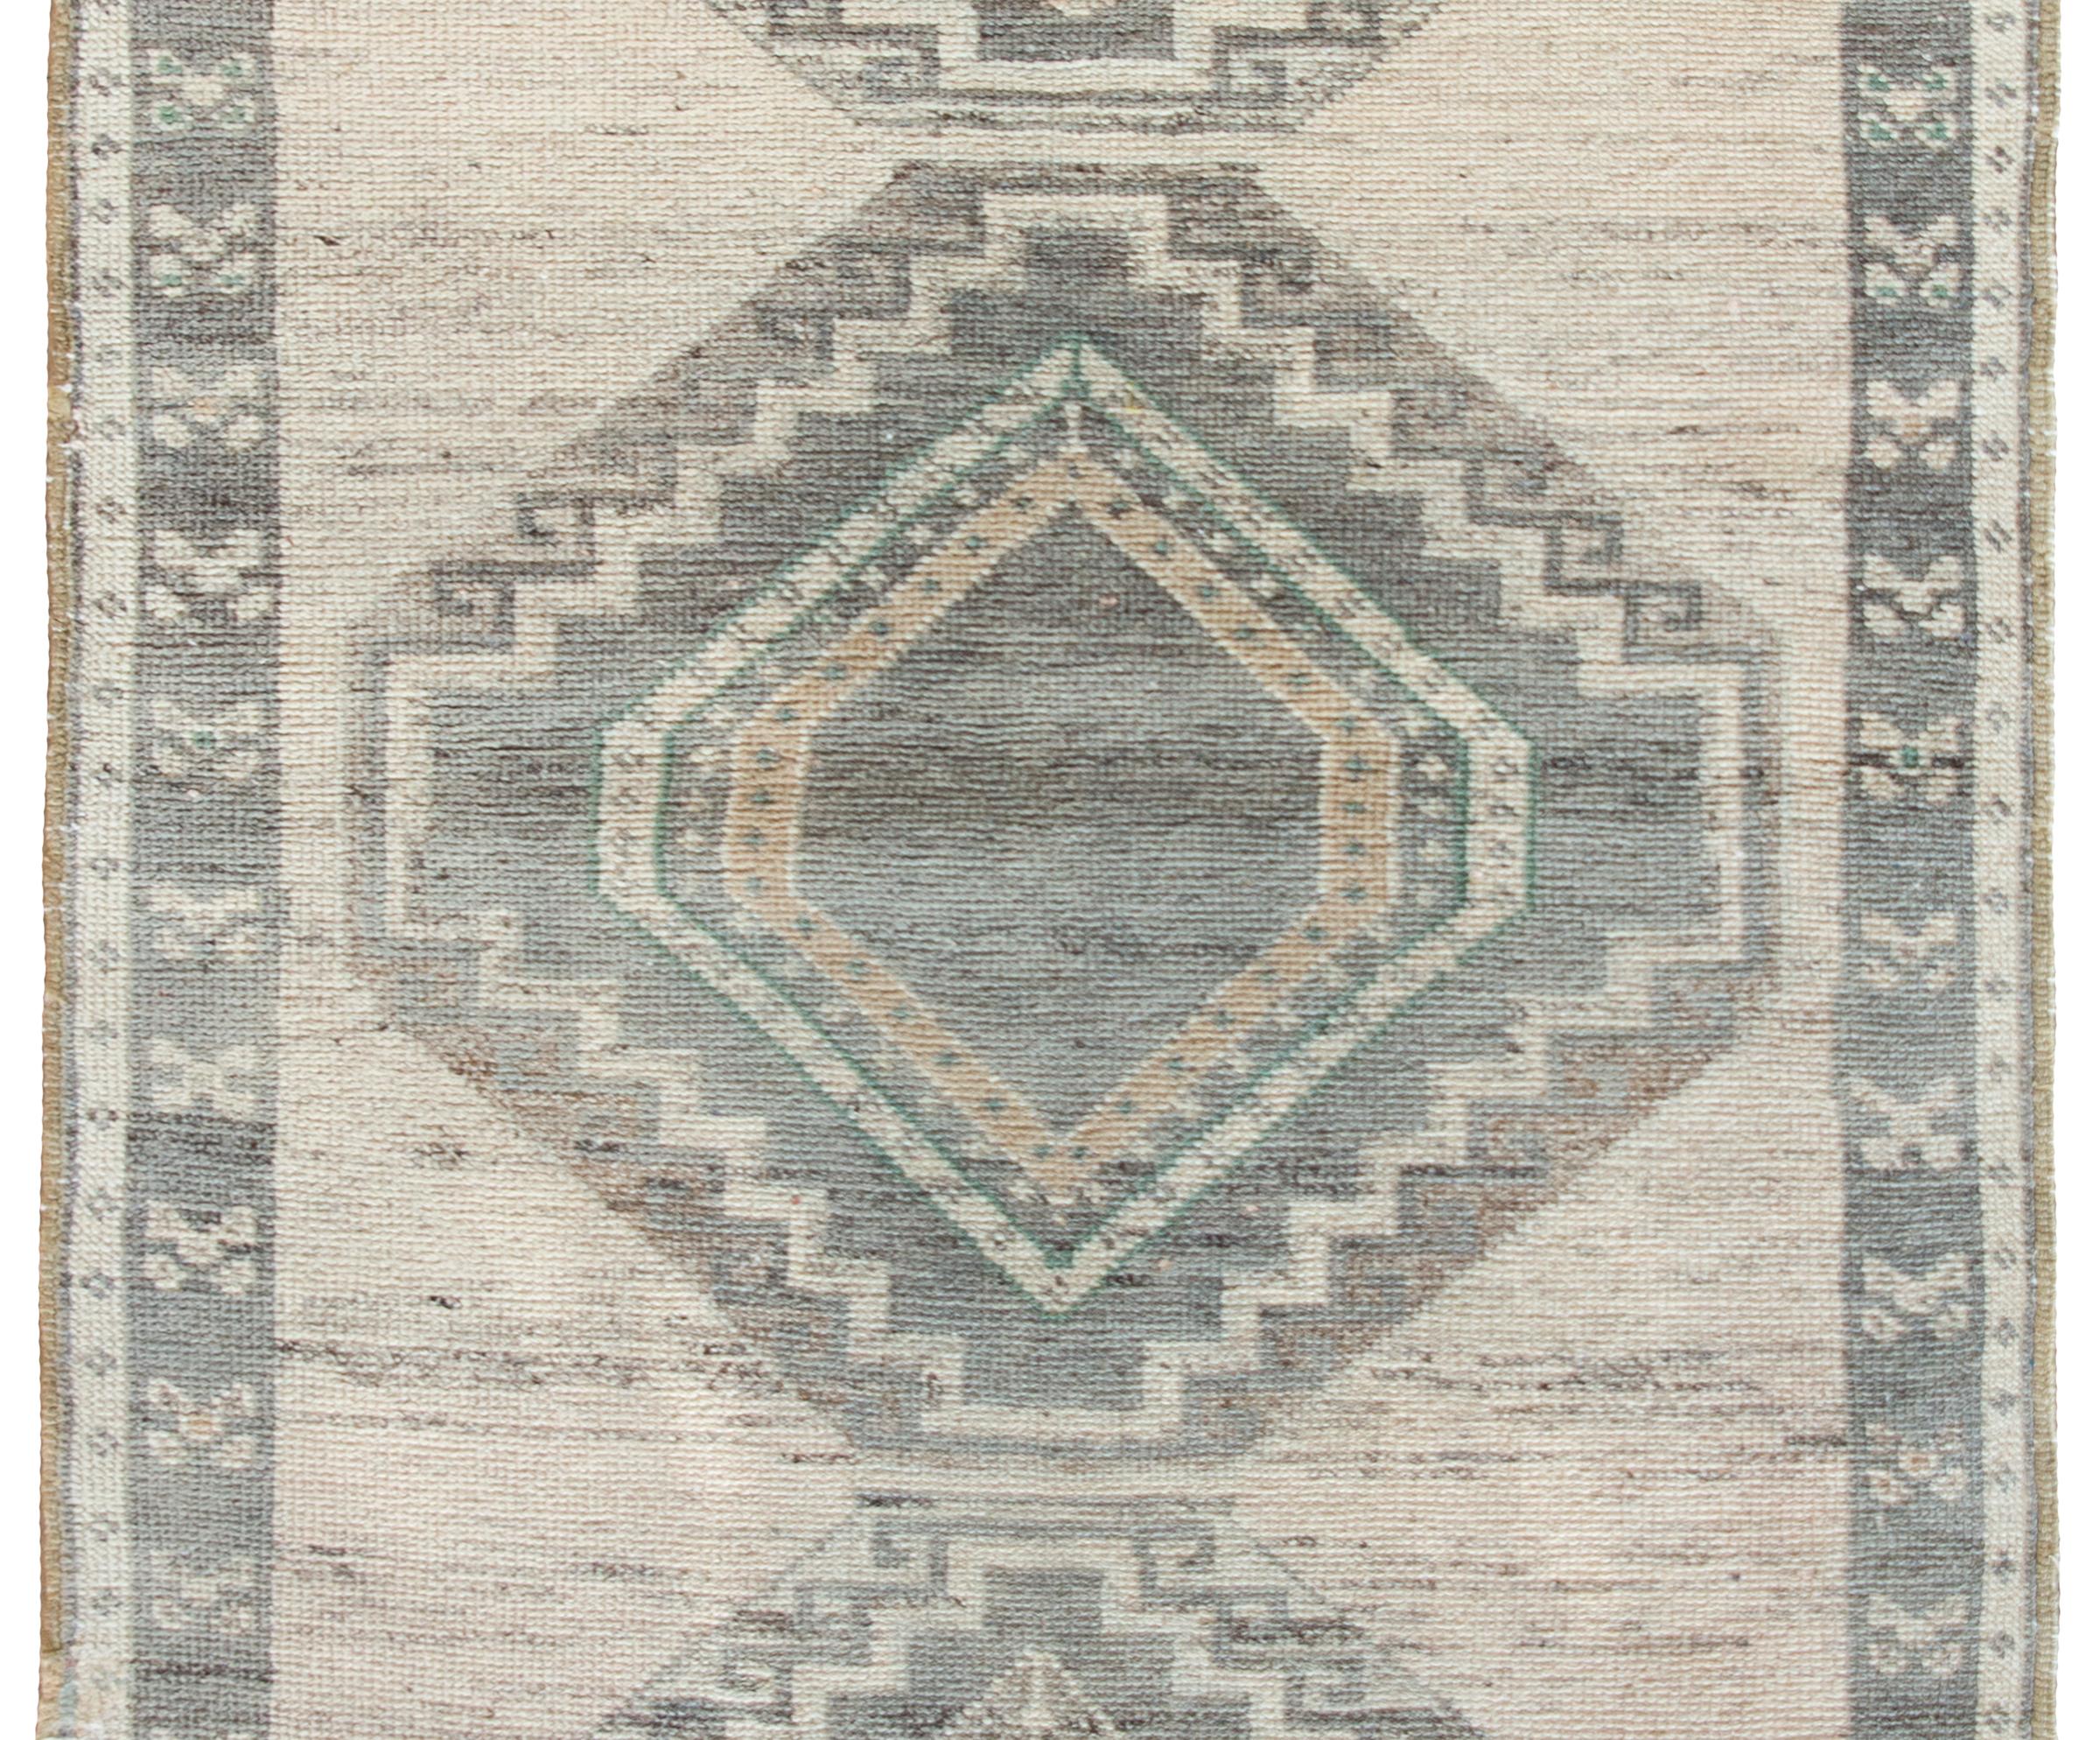 A vintage Persian Serab rug with three large geometric diamond medallions surrounded by a simple border with even more geometric stylized flowers, and all woven in simple grey, browns, and creams.  